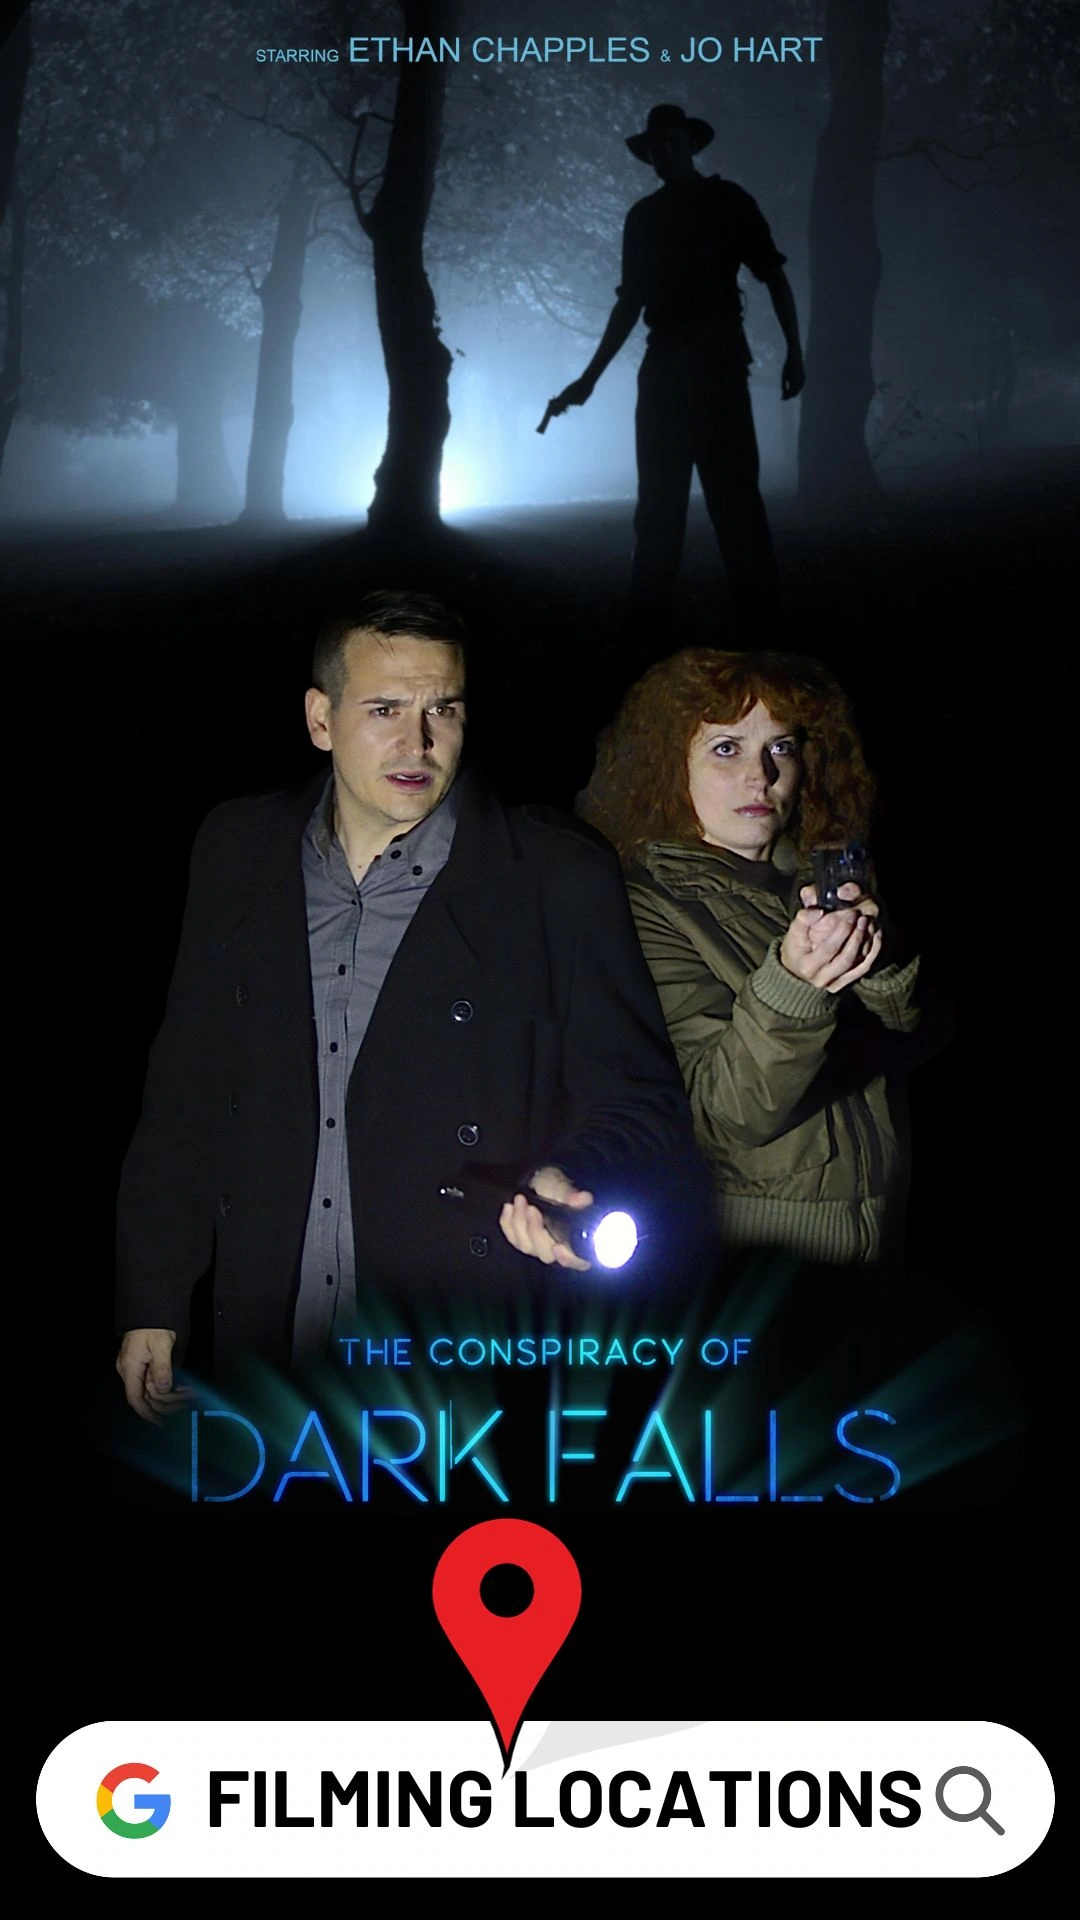 The Conspiracy of Dark Falls Filming Locations